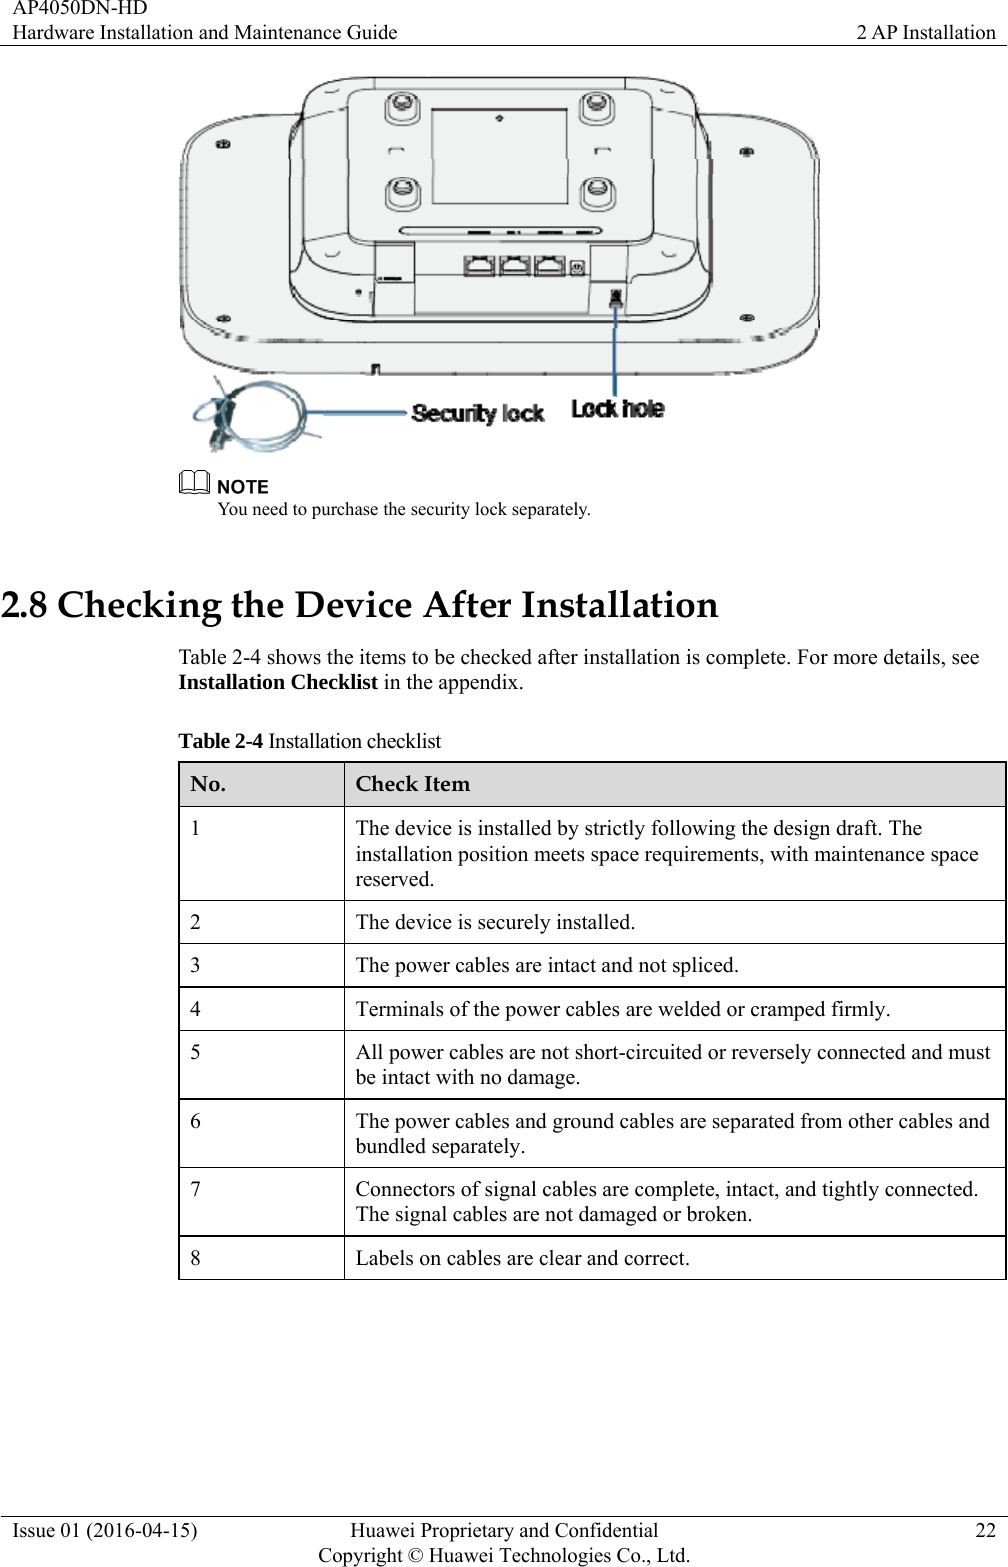 AP4050DN-HD Hardware Installation and Maintenance Guide  2 AP Installation Issue 01 (2016-04-15)  Huawei Proprietary and Confidential         Copyright © Huawei Technologies Co., Ltd.22   You need to purchase the security lock separately. 2.8 Checking the Device After Installation Table 2-4 shows the items to be checked after installation is complete. For more details, see Installation Checklist in the appendix. Table 2-4 Installation checklist No.  Check Item 1  The device is installed by strictly following the design draft. The installation position meets space requirements, with maintenance space reserved. 2  The device is securely installed. 3  The power cables are intact and not spliced. 4  Terminals of the power cables are welded or cramped firmly. 5  All power cables are not short-circuited or reversely connected and must be intact with no damage. 6  The power cables and ground cables are separated from other cables and bundled separately. 7  Connectors of signal cables are complete, intact, and tightly connected. The signal cables are not damaged or broken. 8  Labels on cables are clear and correct.  